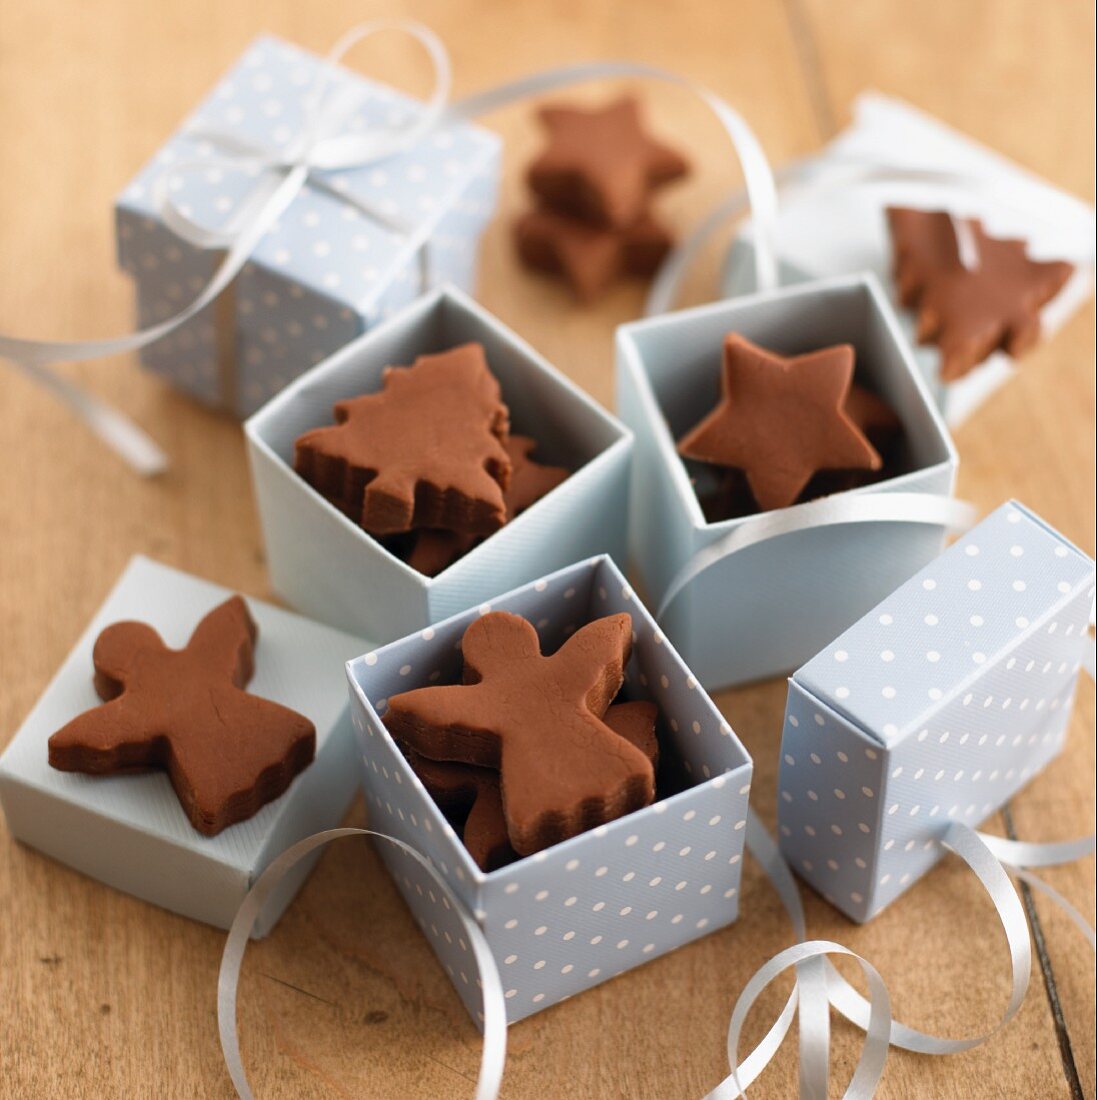 Fudge in assorted Christmas shapes (stars, angels, trees) for gifting